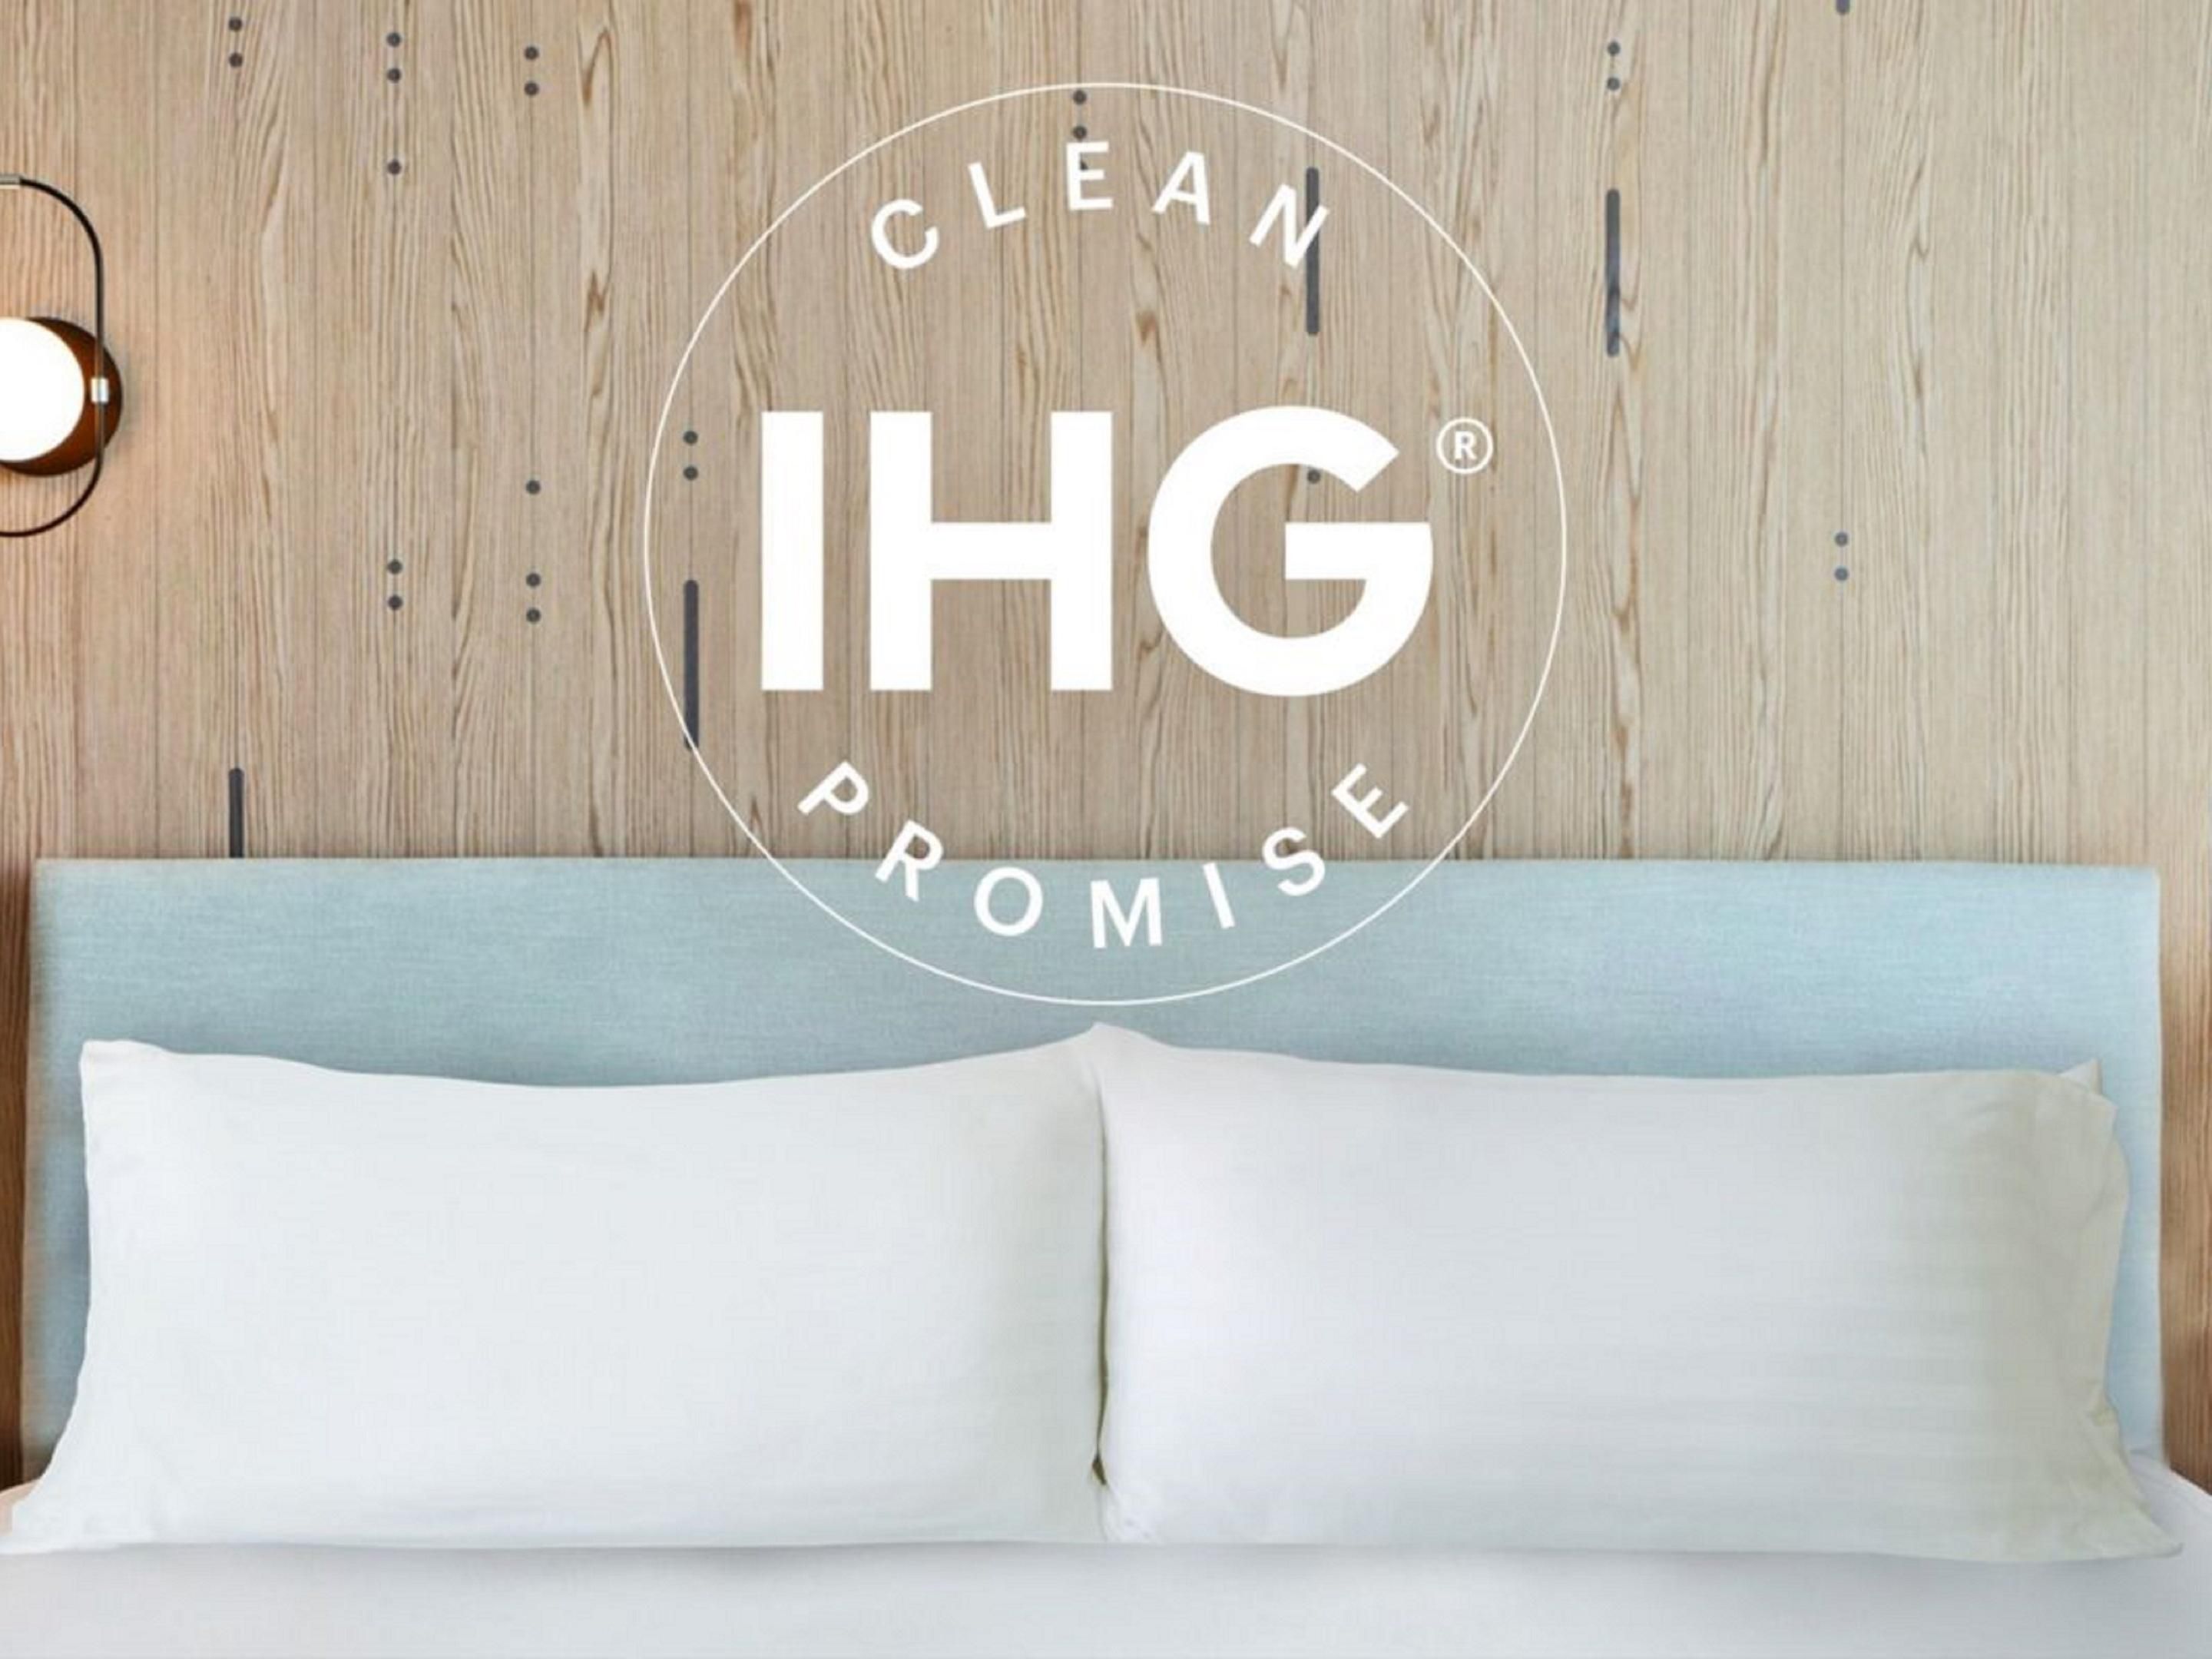 As the world adjusts to new travel norms and expectations, we're enhancing the experience for you, our guests, by redefining cleanliness and supporting your well-being throughout your stay.